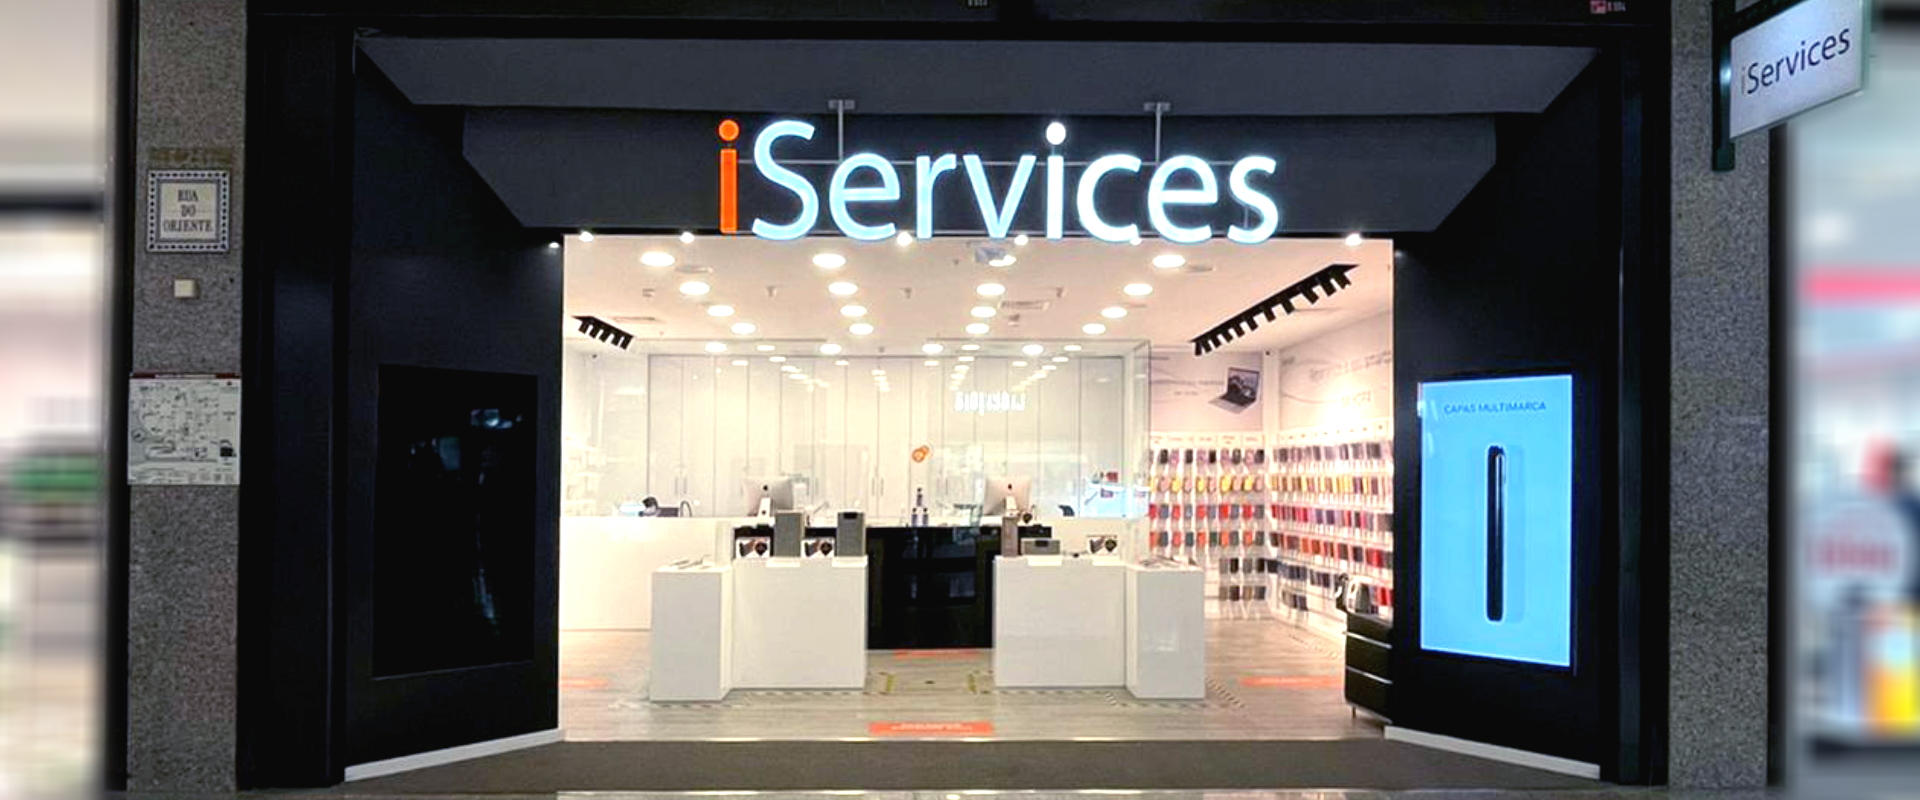 iServices Colombo